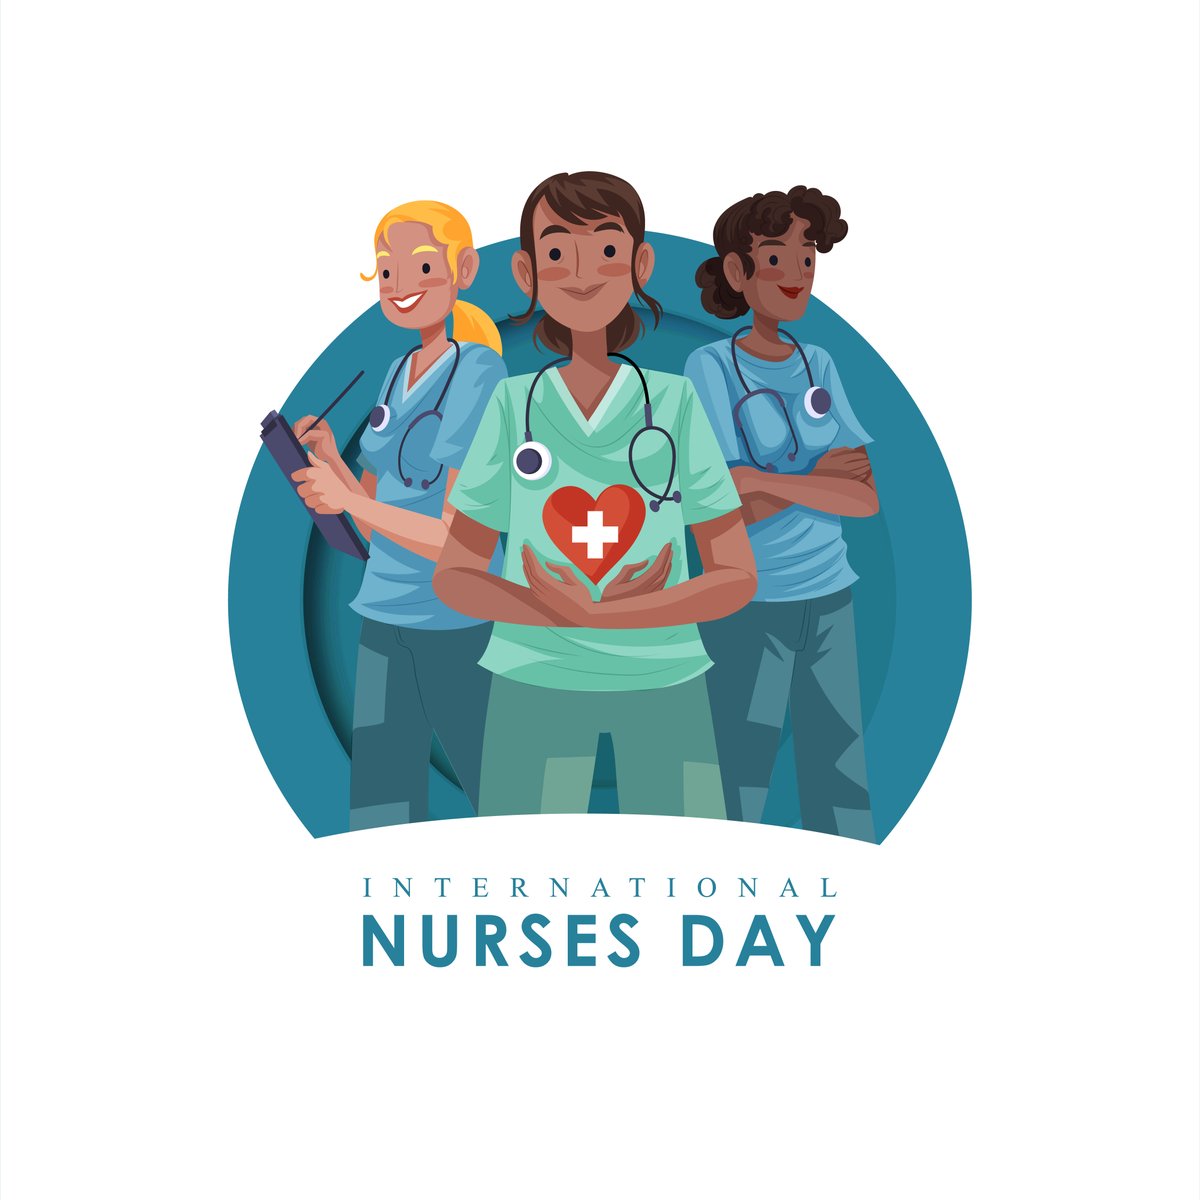 Happy International Nurses Day to all the dedicated and compassionate caregivers out there! We appreciate your tireless efforts toward making our healthcare system better. 
Tag a nurse you know and show them the respect they deserve! #ThankYouNurses #InternationalNursesDay